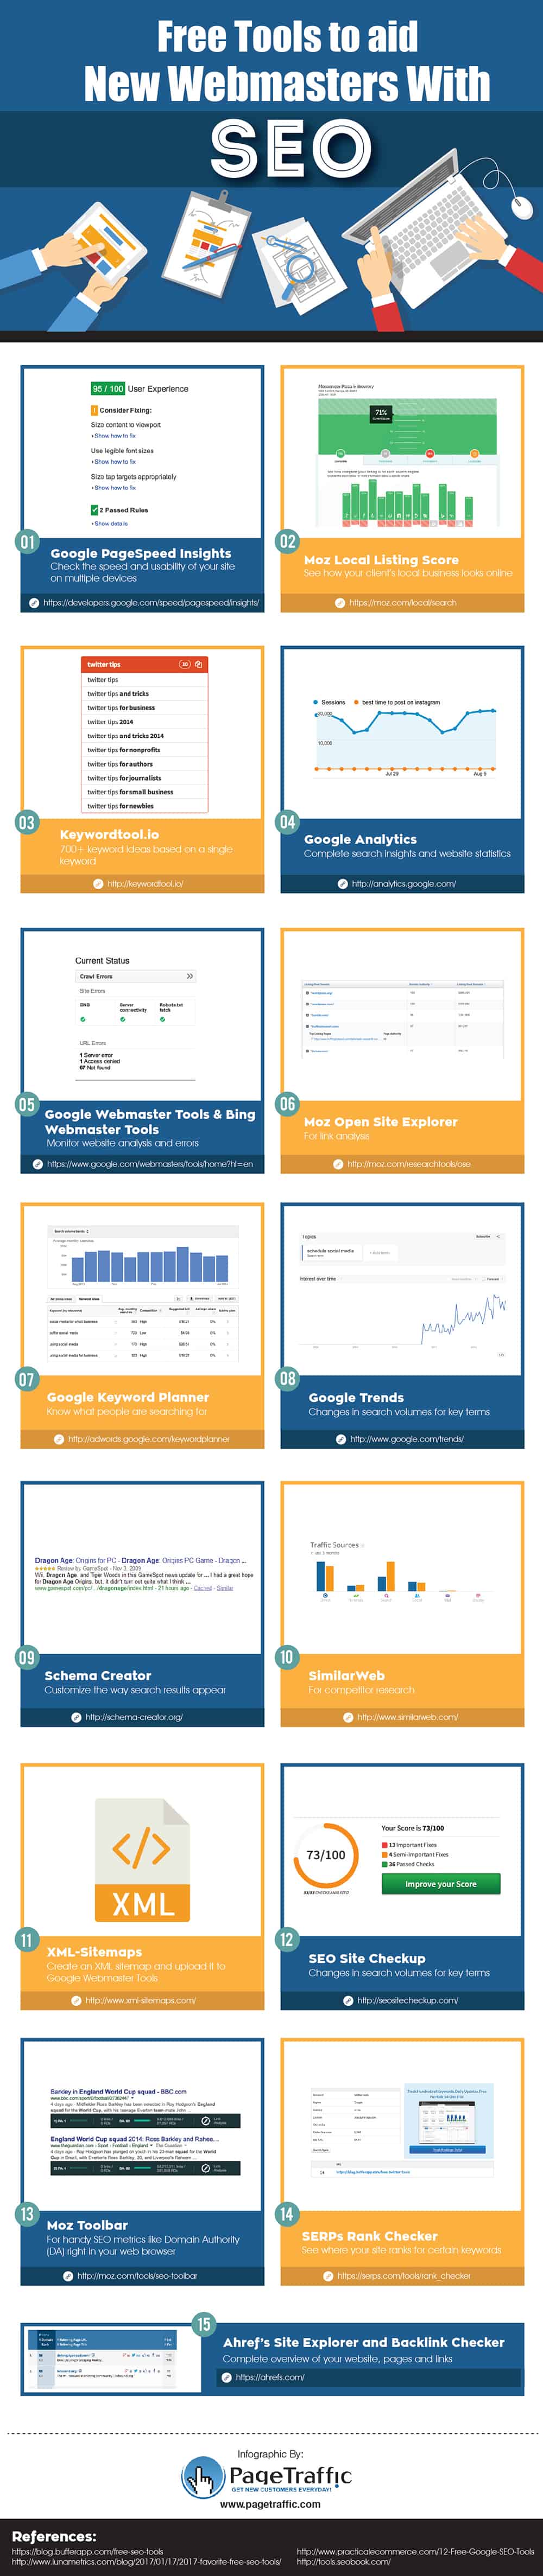 15 Free Tools to Help Track and Improve SEO Performance [Infographic] | Social Media Today